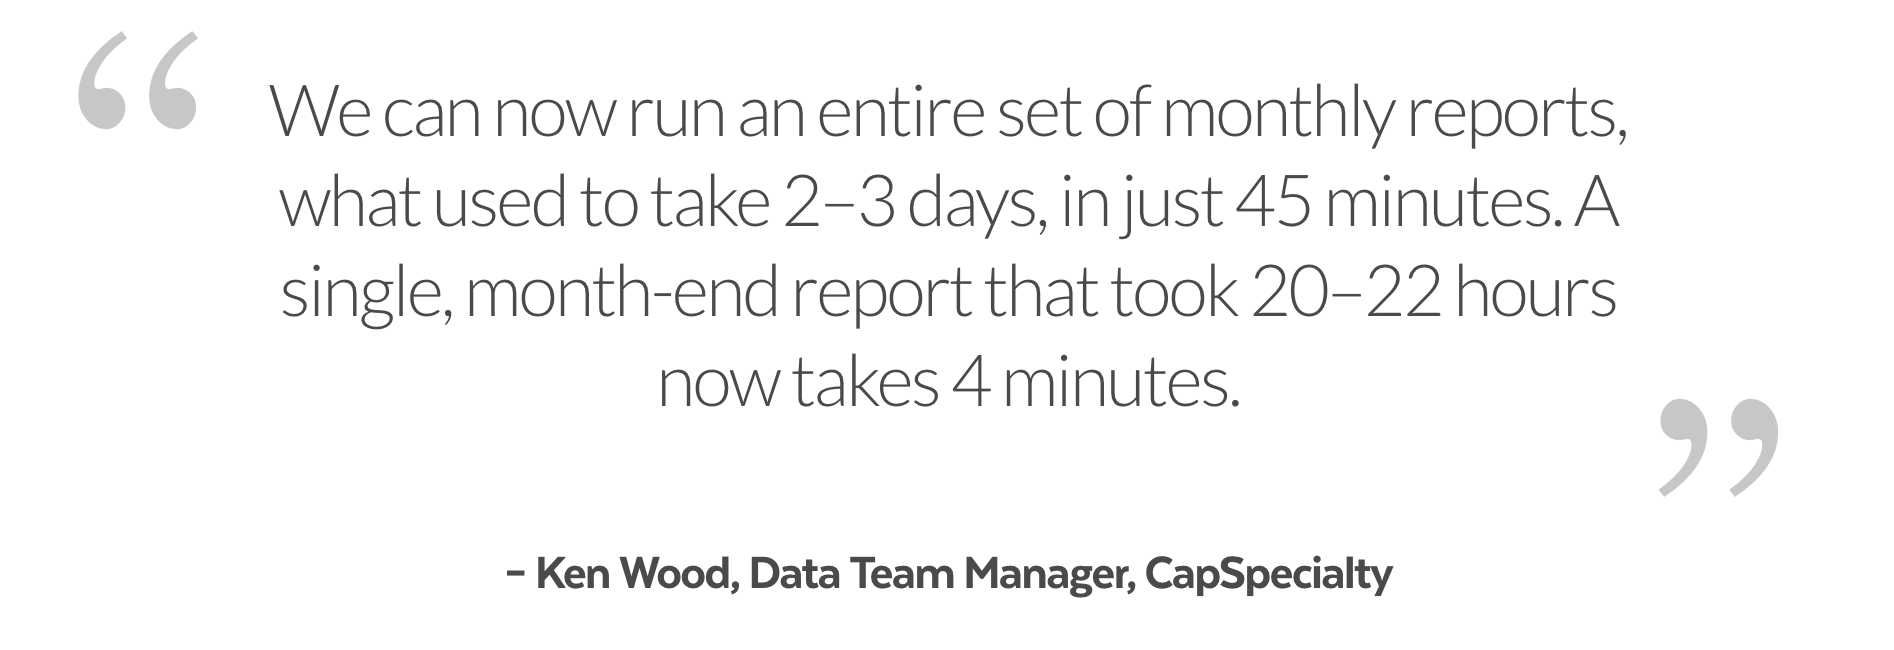 Snowflake testimonial from Ken Wood, Data Team Manager at CapSpeciality